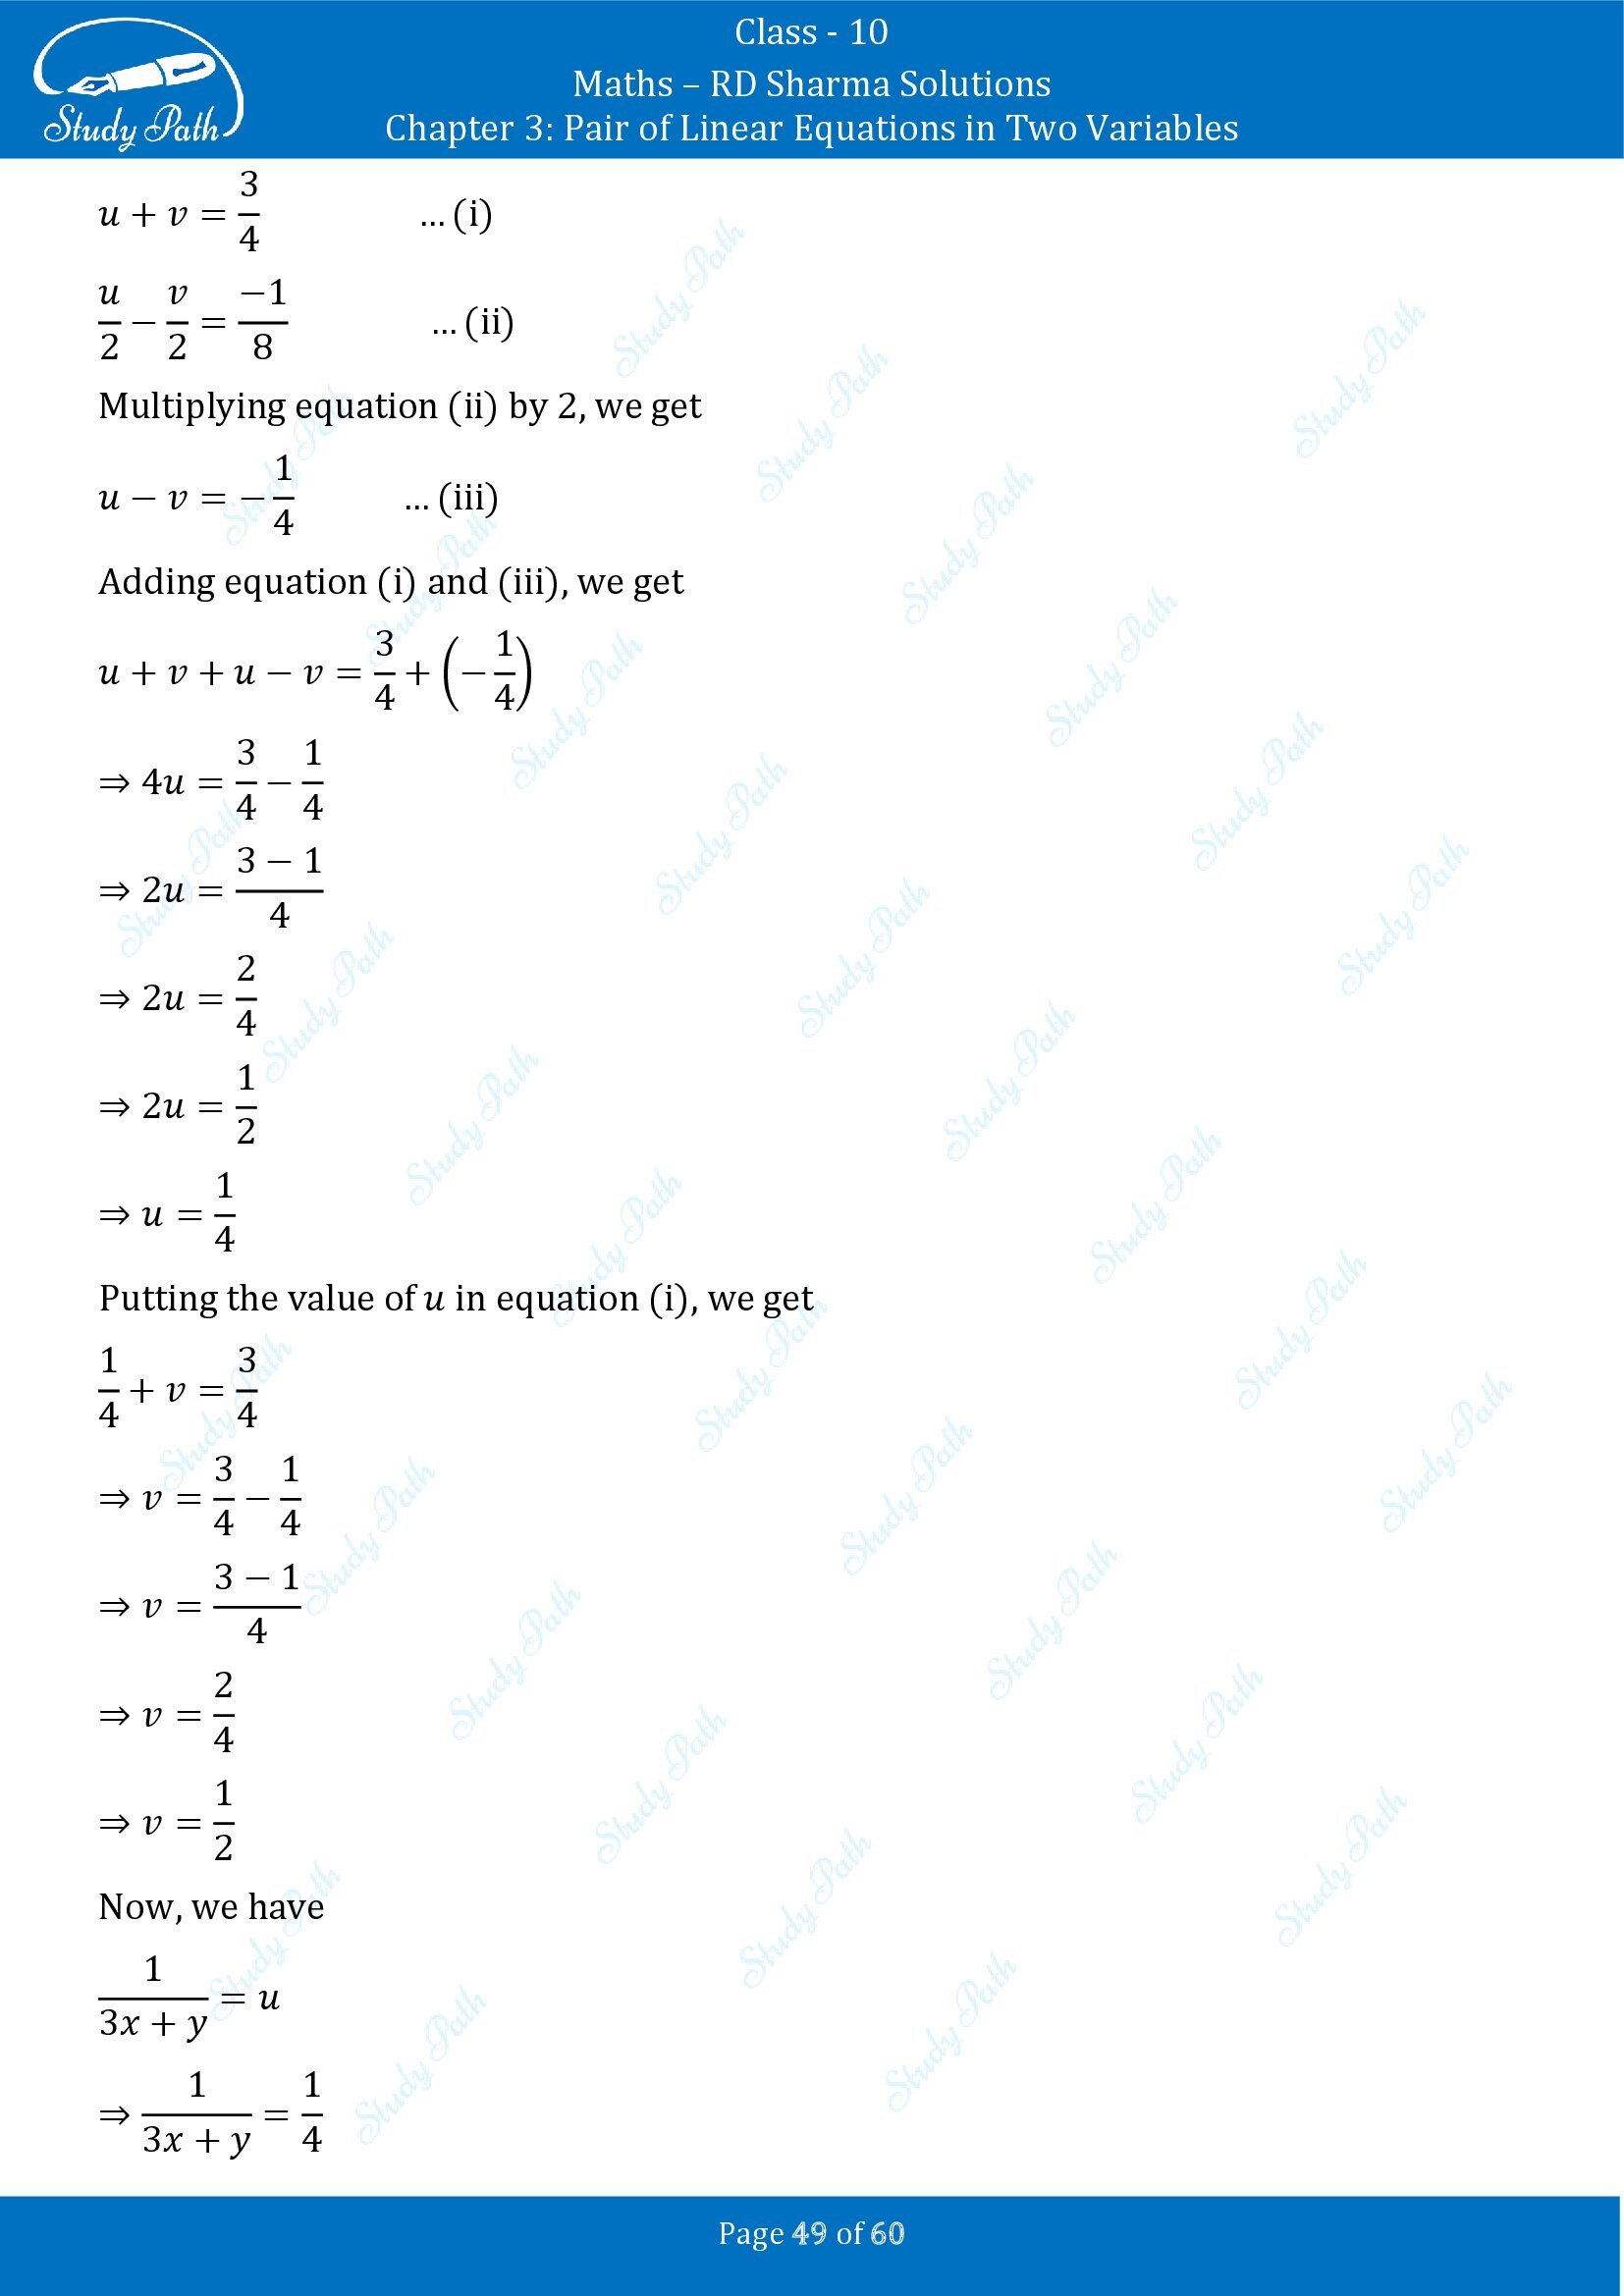 RD Sharma Solutions Class 10 Chapter 3 Pair of Linear Equations in Two Variables Exercise 3.3 00049